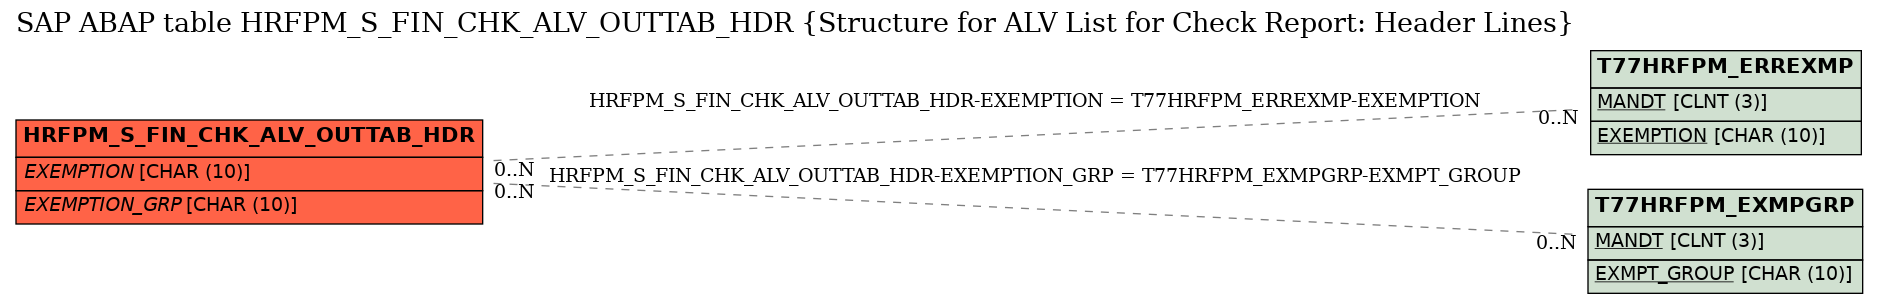 E-R Diagram for table HRFPM_S_FIN_CHK_ALV_OUTTAB_HDR (Structure for ALV List for Check Report: Header Lines)